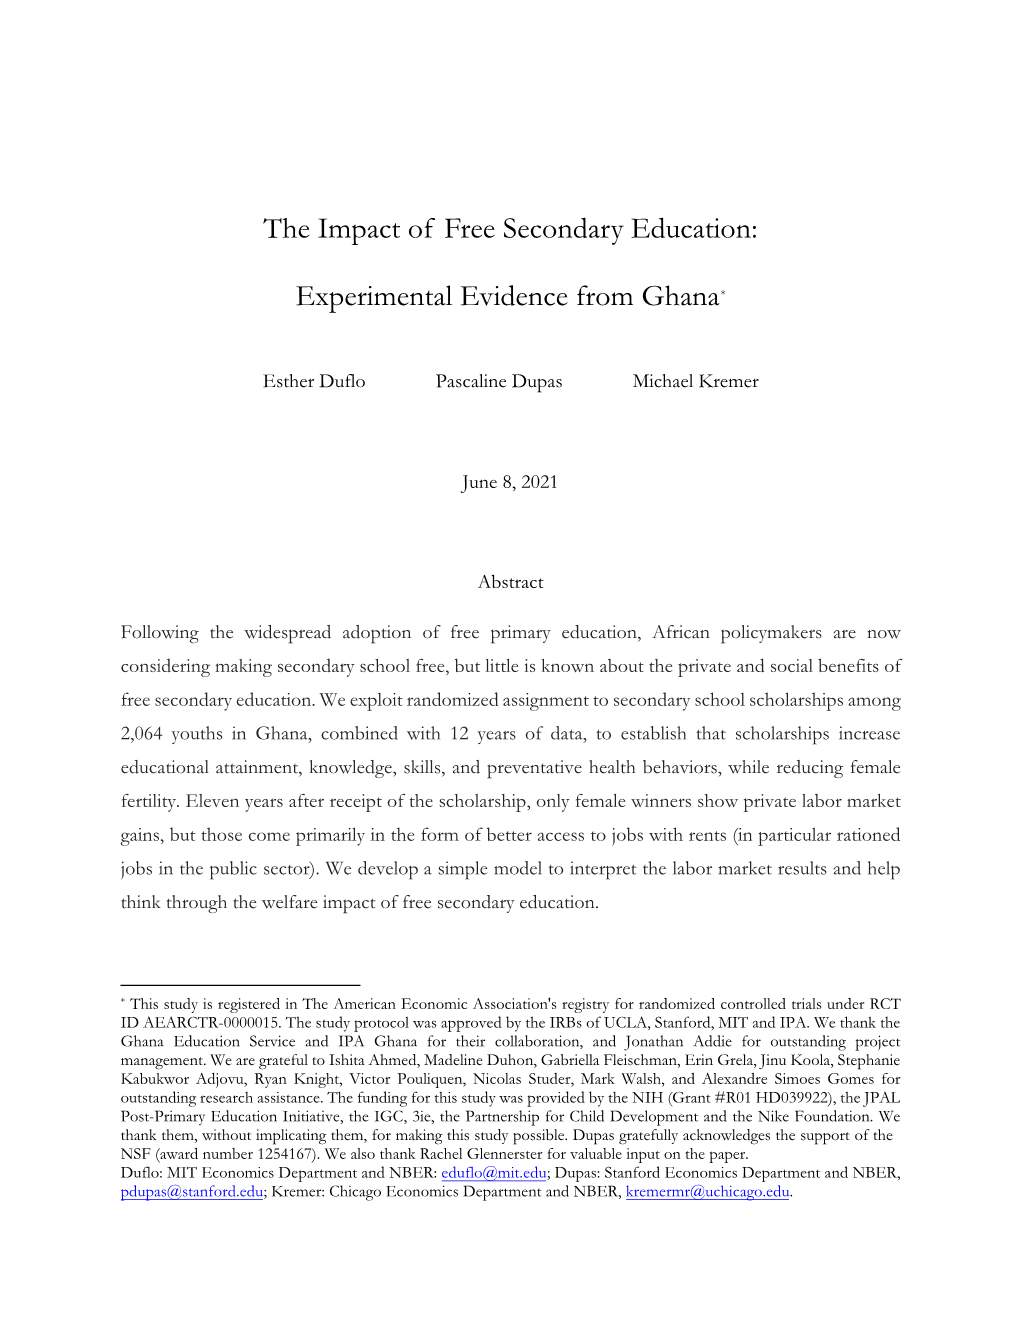 The Impact of Free Secondary Education: Experimental Evidence